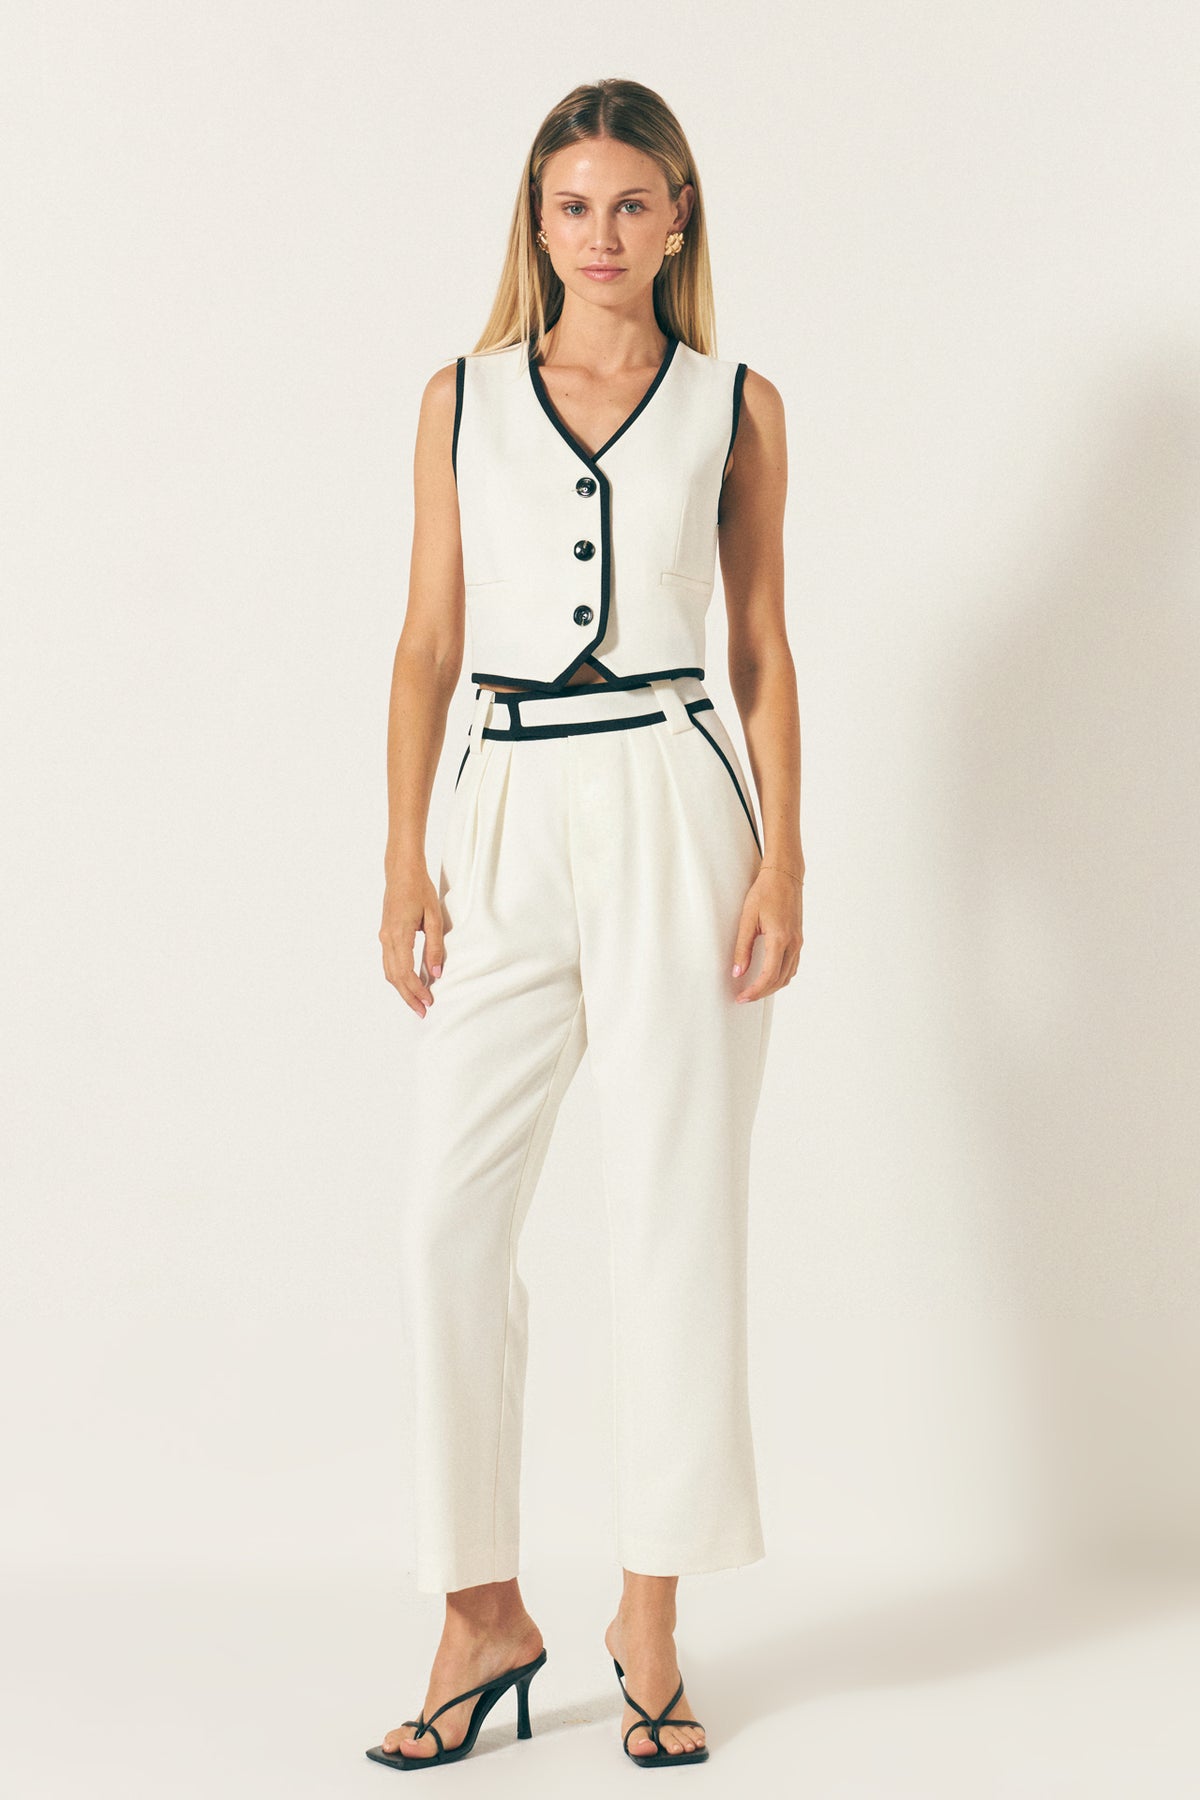 ENDLESS ROSE - Trousers with Binding Detail - PANTS available at Objectrare